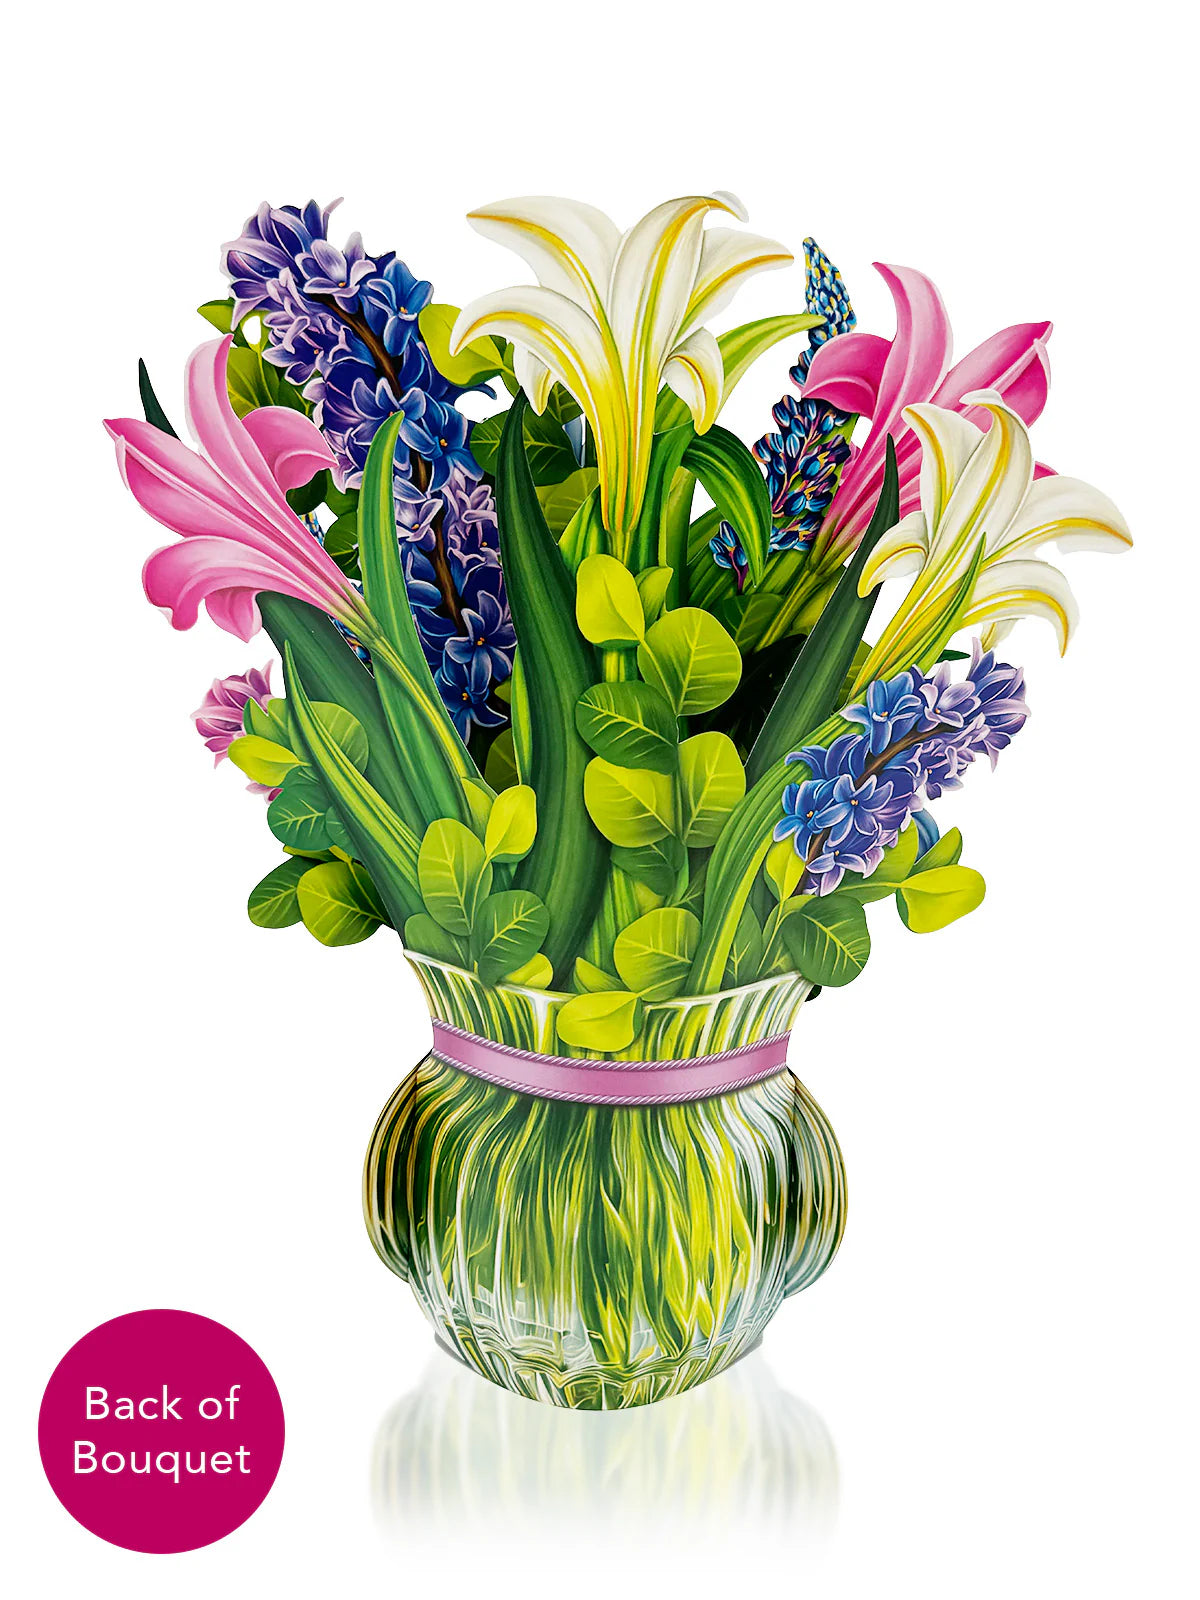 Lilies & Lupines Pop Up Flower Bouquet Greeting Card    